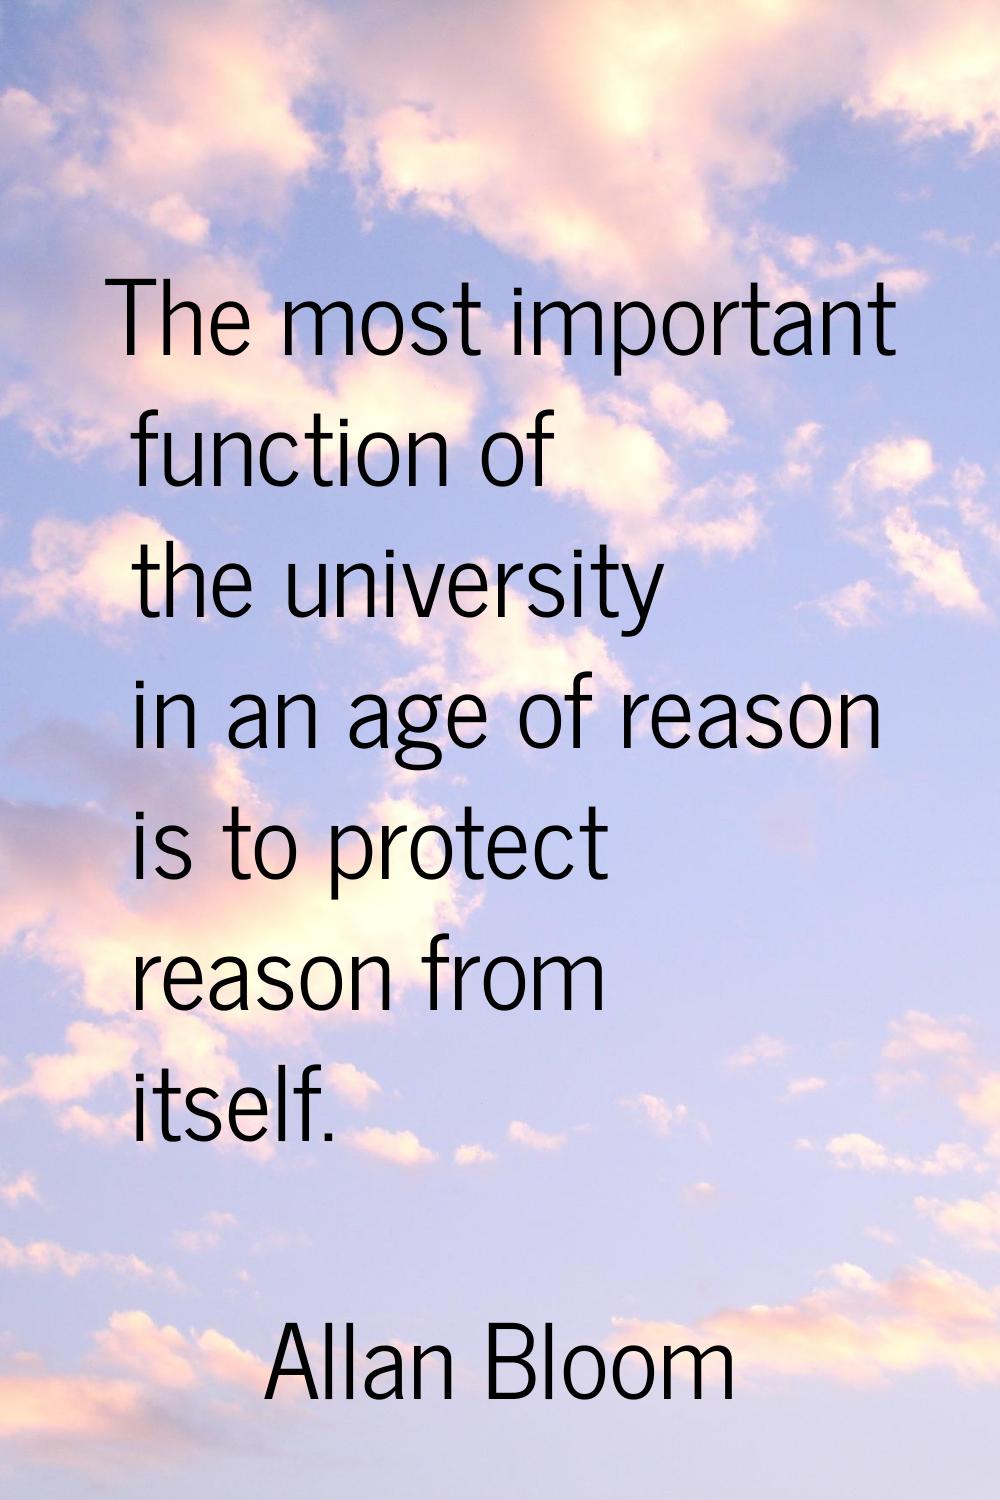 The most important function of the university in an age of reason is to protect reason from itself.